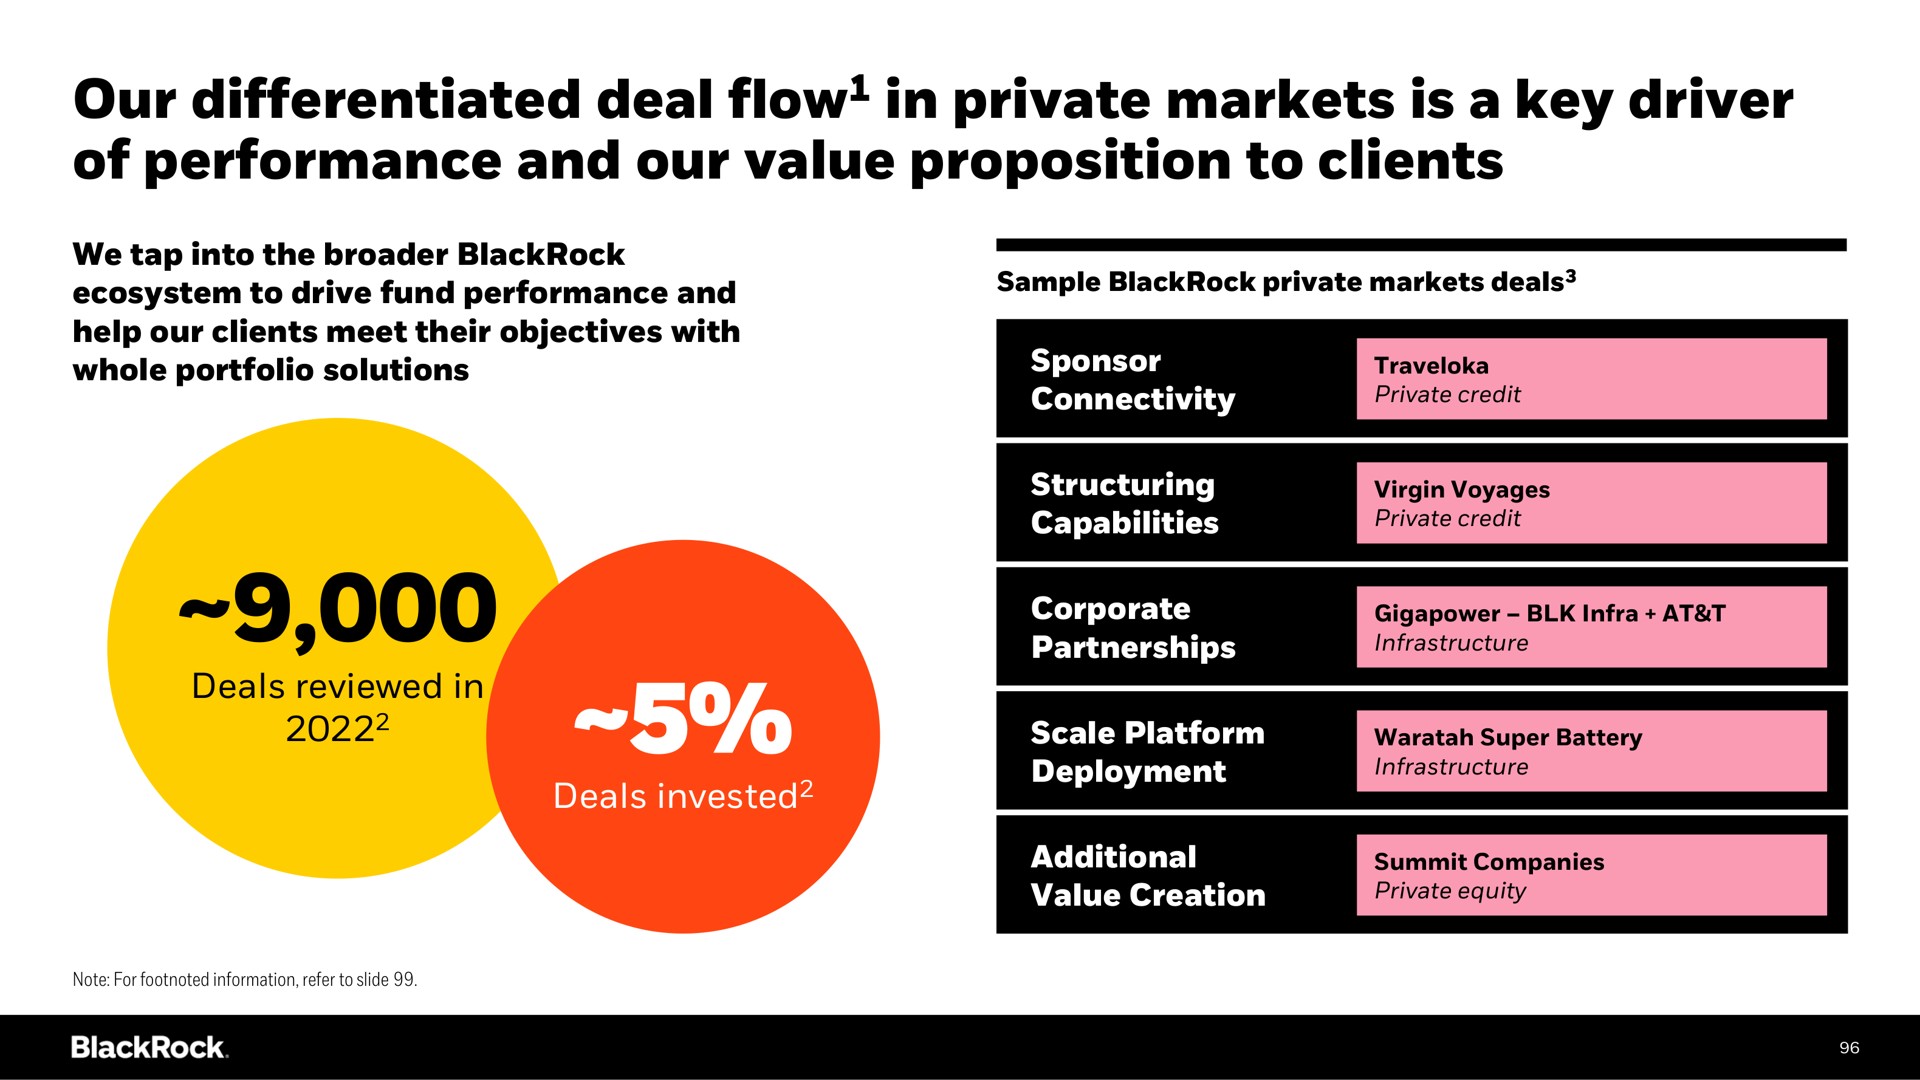 our differentiated deal flow in private markets is a key driver of performance and our value proposition to clients flow | BlackRock